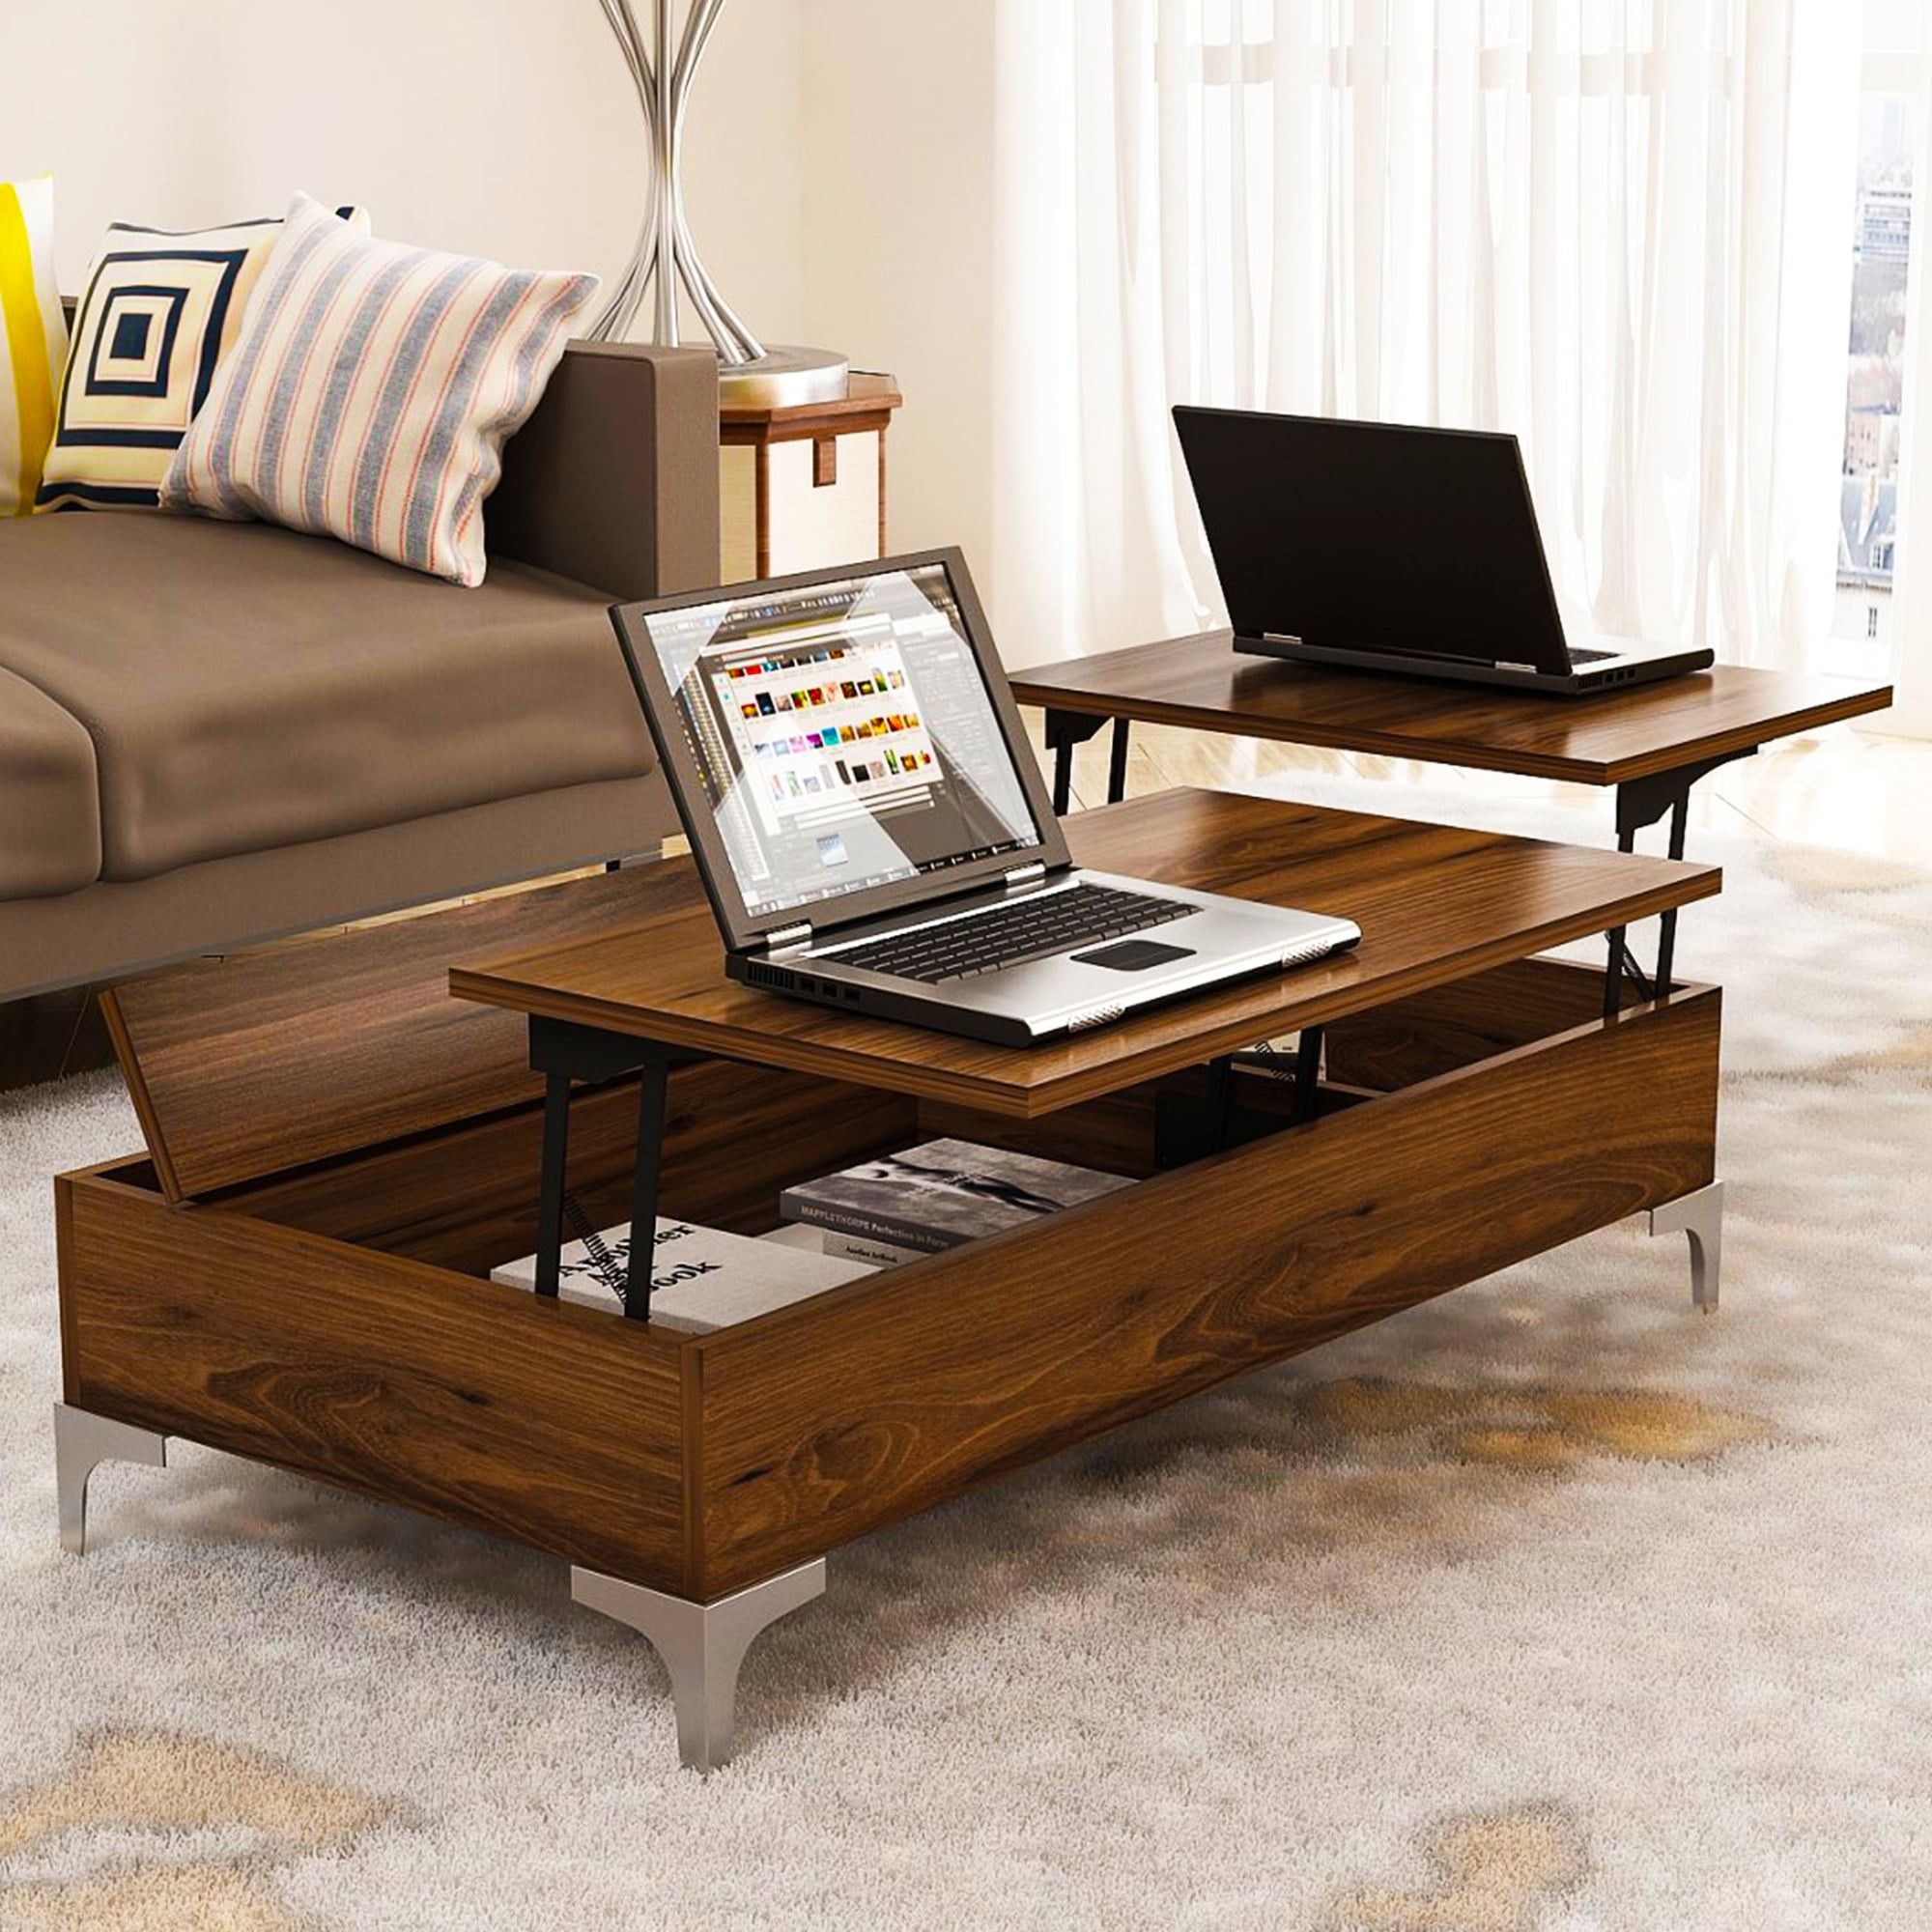 Lift Top Coffee Table, Adjustable Wood Table With Hidden Storage With Wood Lift Top Coffee Tables (View 3 of 15)